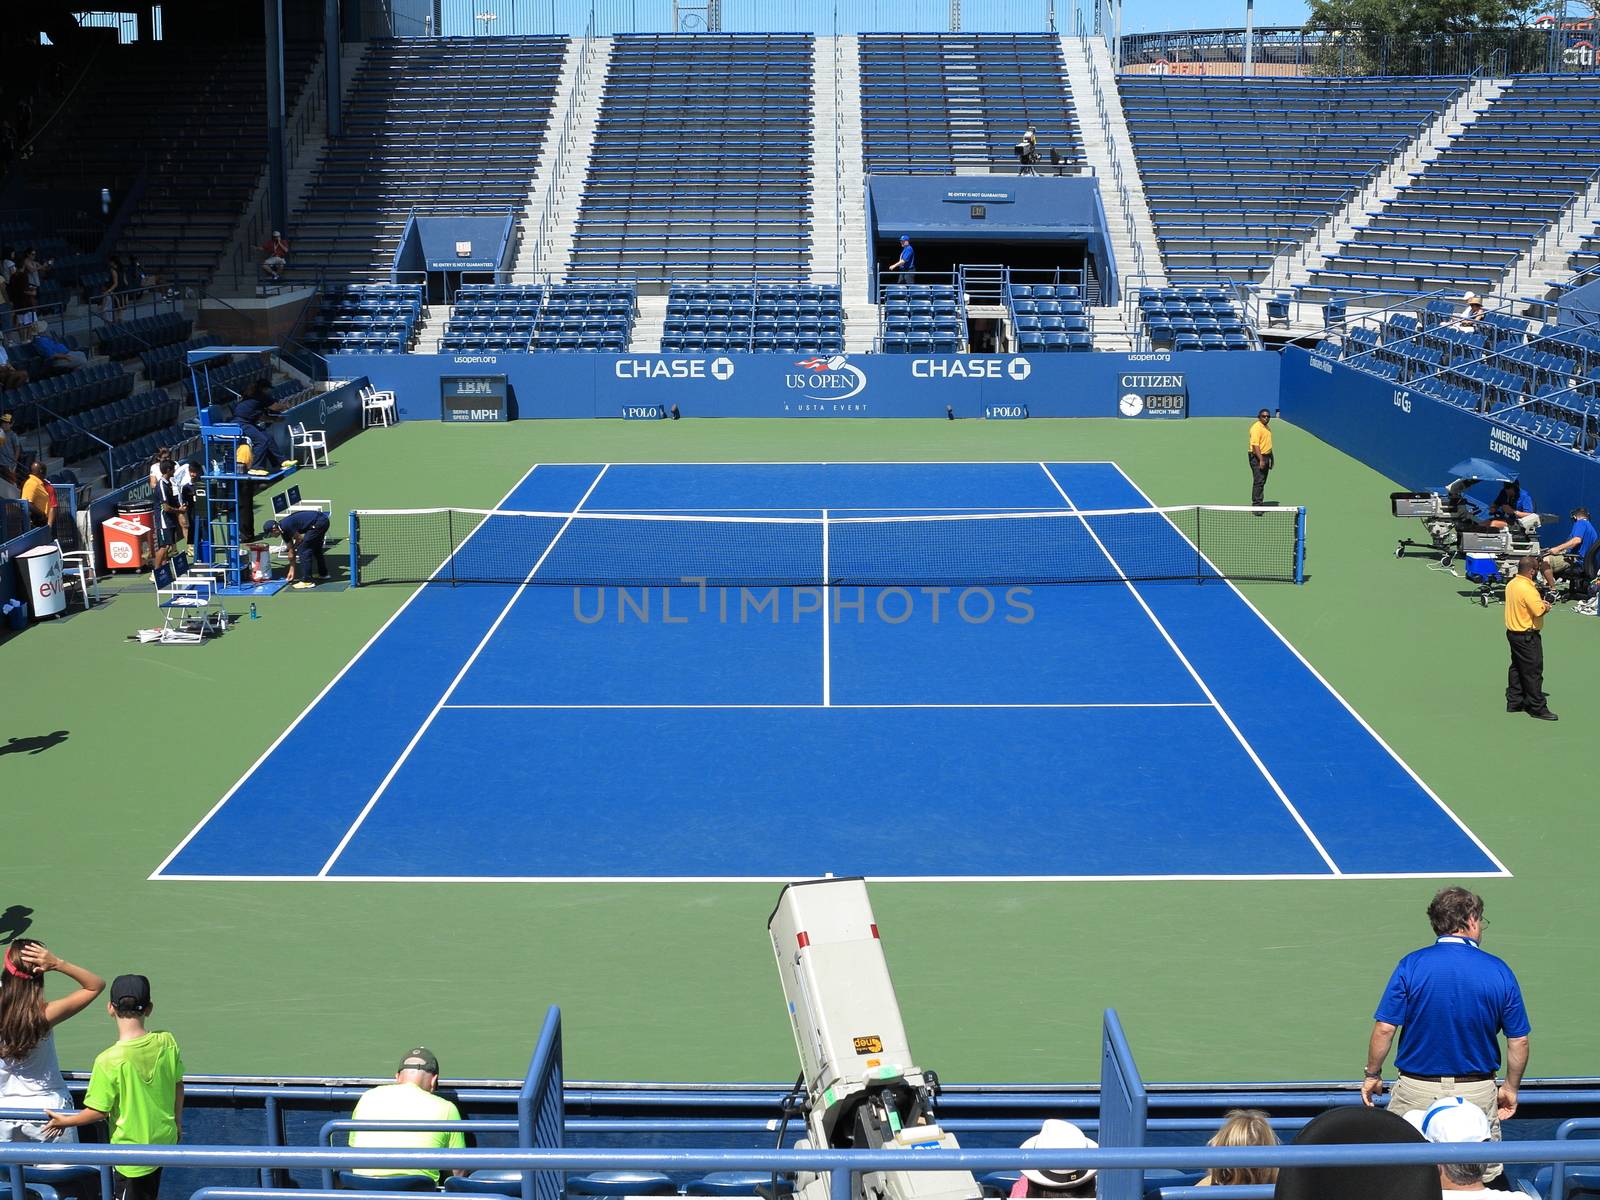 Famous 6,000 seat Grandstand Court at the Billie Jean King Tennis Center in 2014.